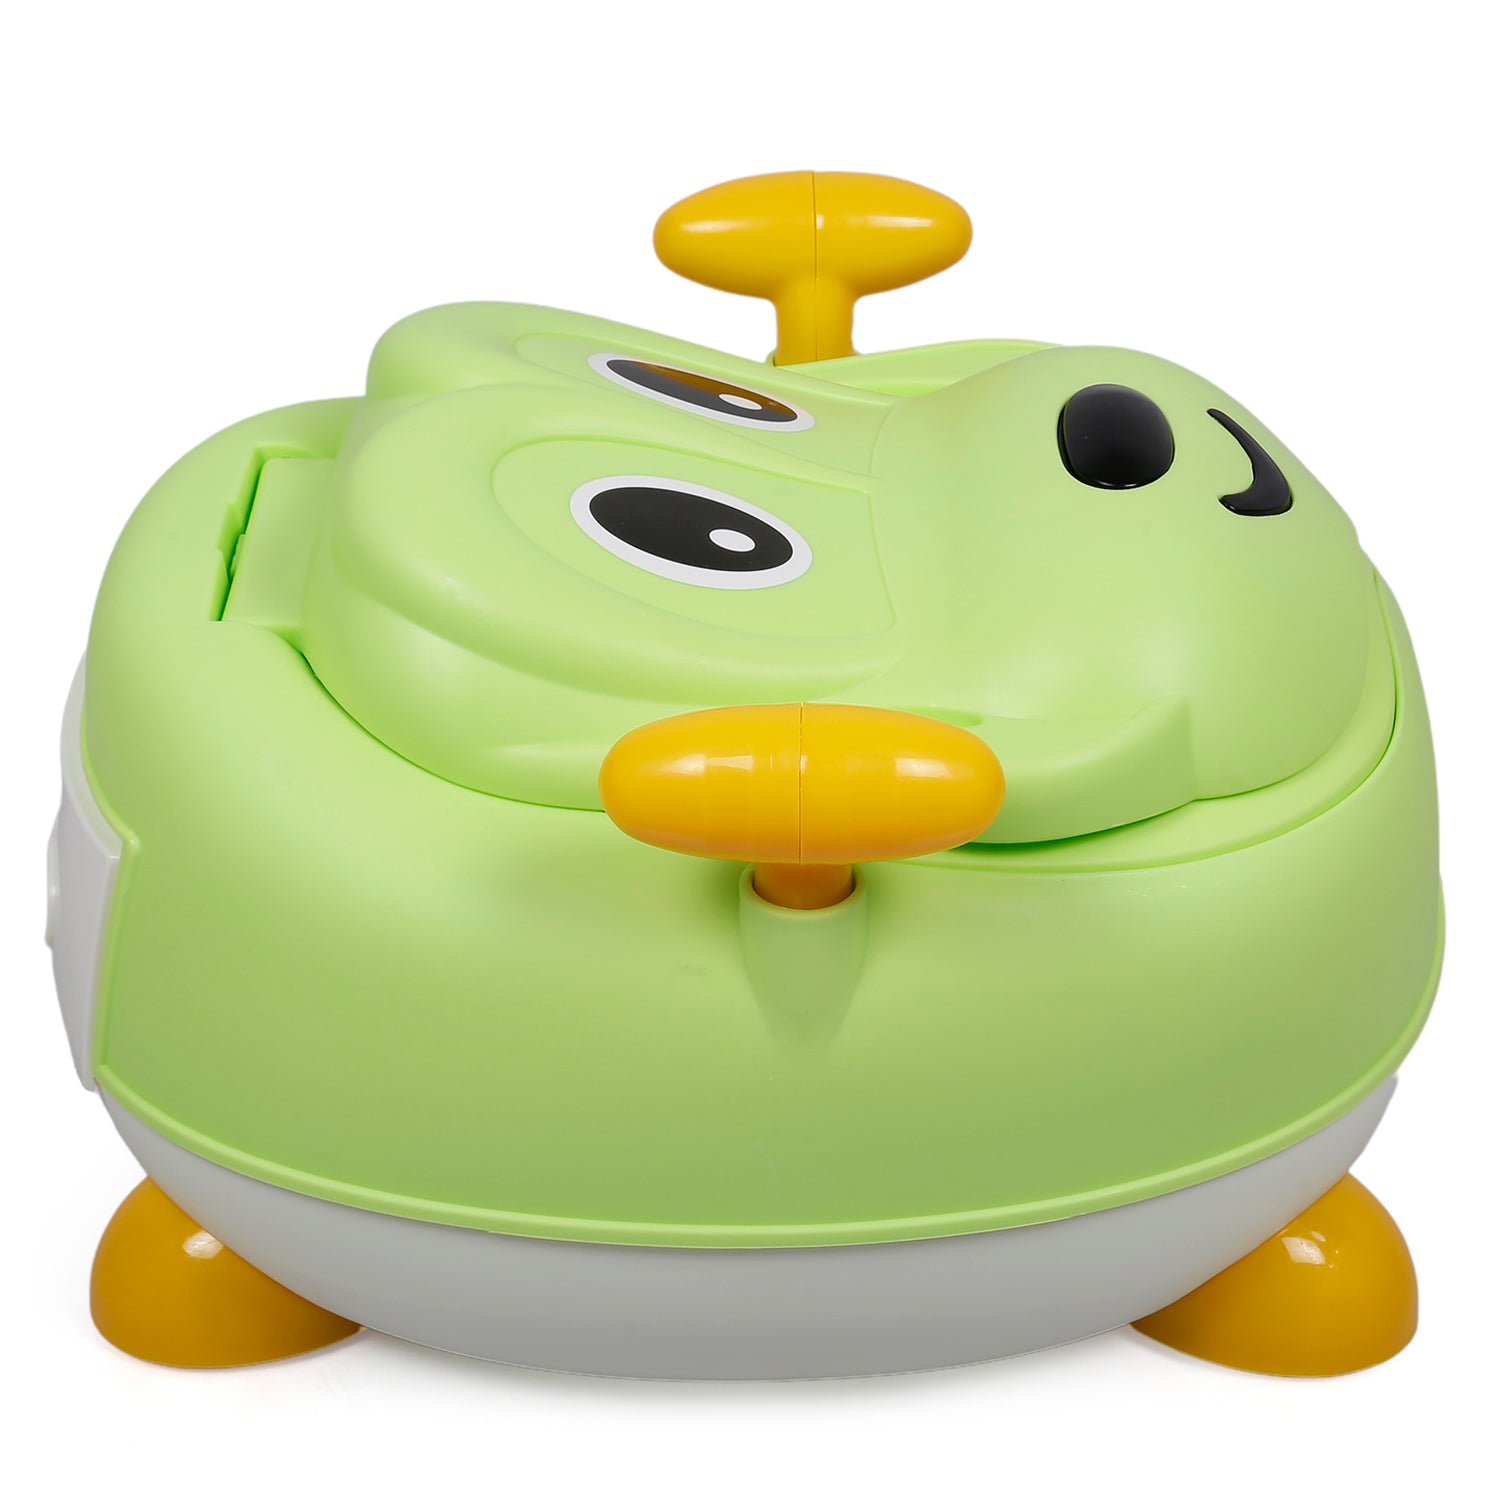 Baby Moo Toilet Training Potty Chair Puppy Shaped Green